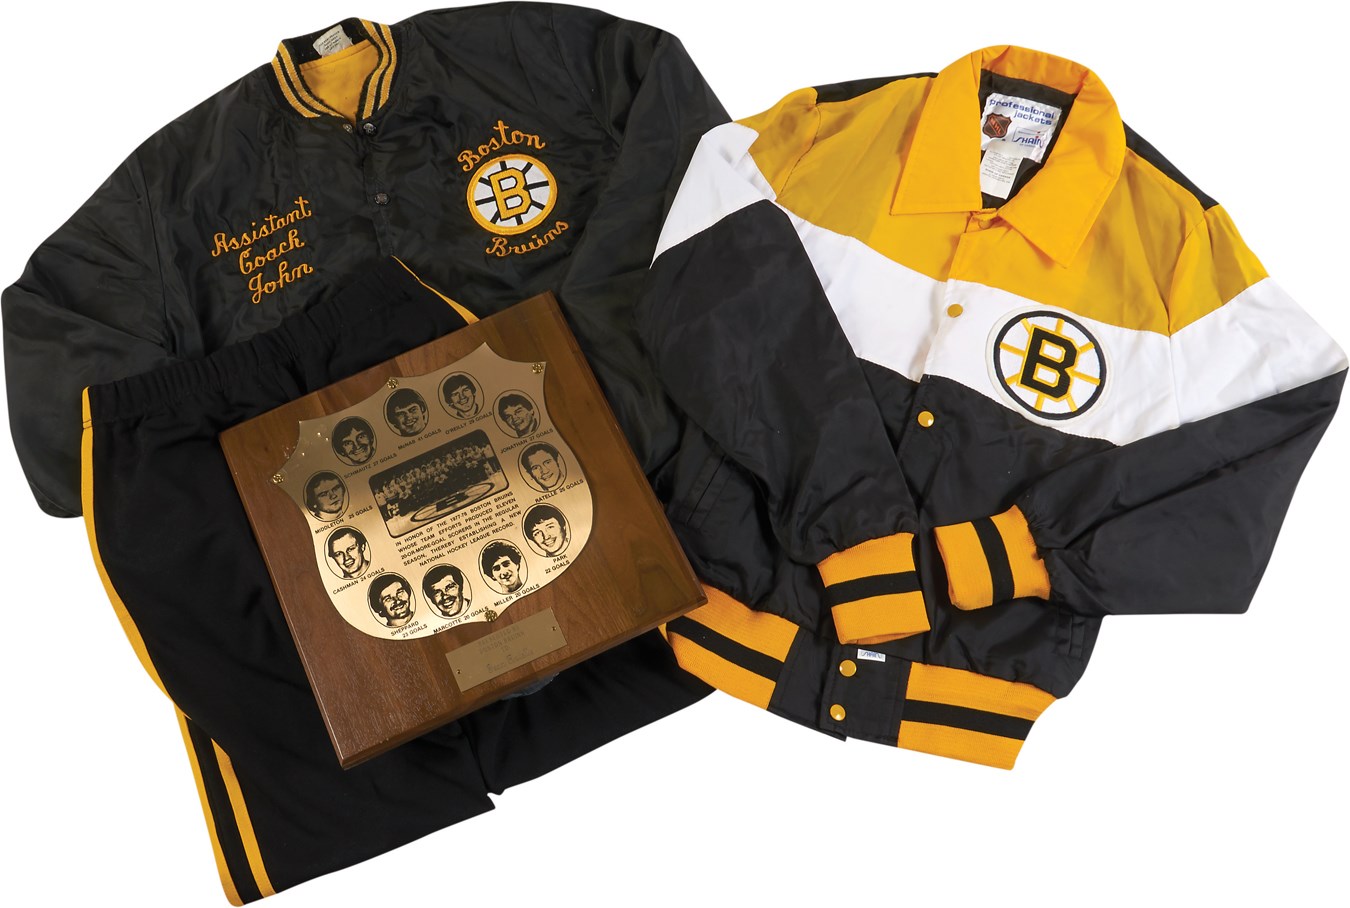 - Jean Ratelle Boston Bruins Award Plaque, Jackets and Warm-Up Pants